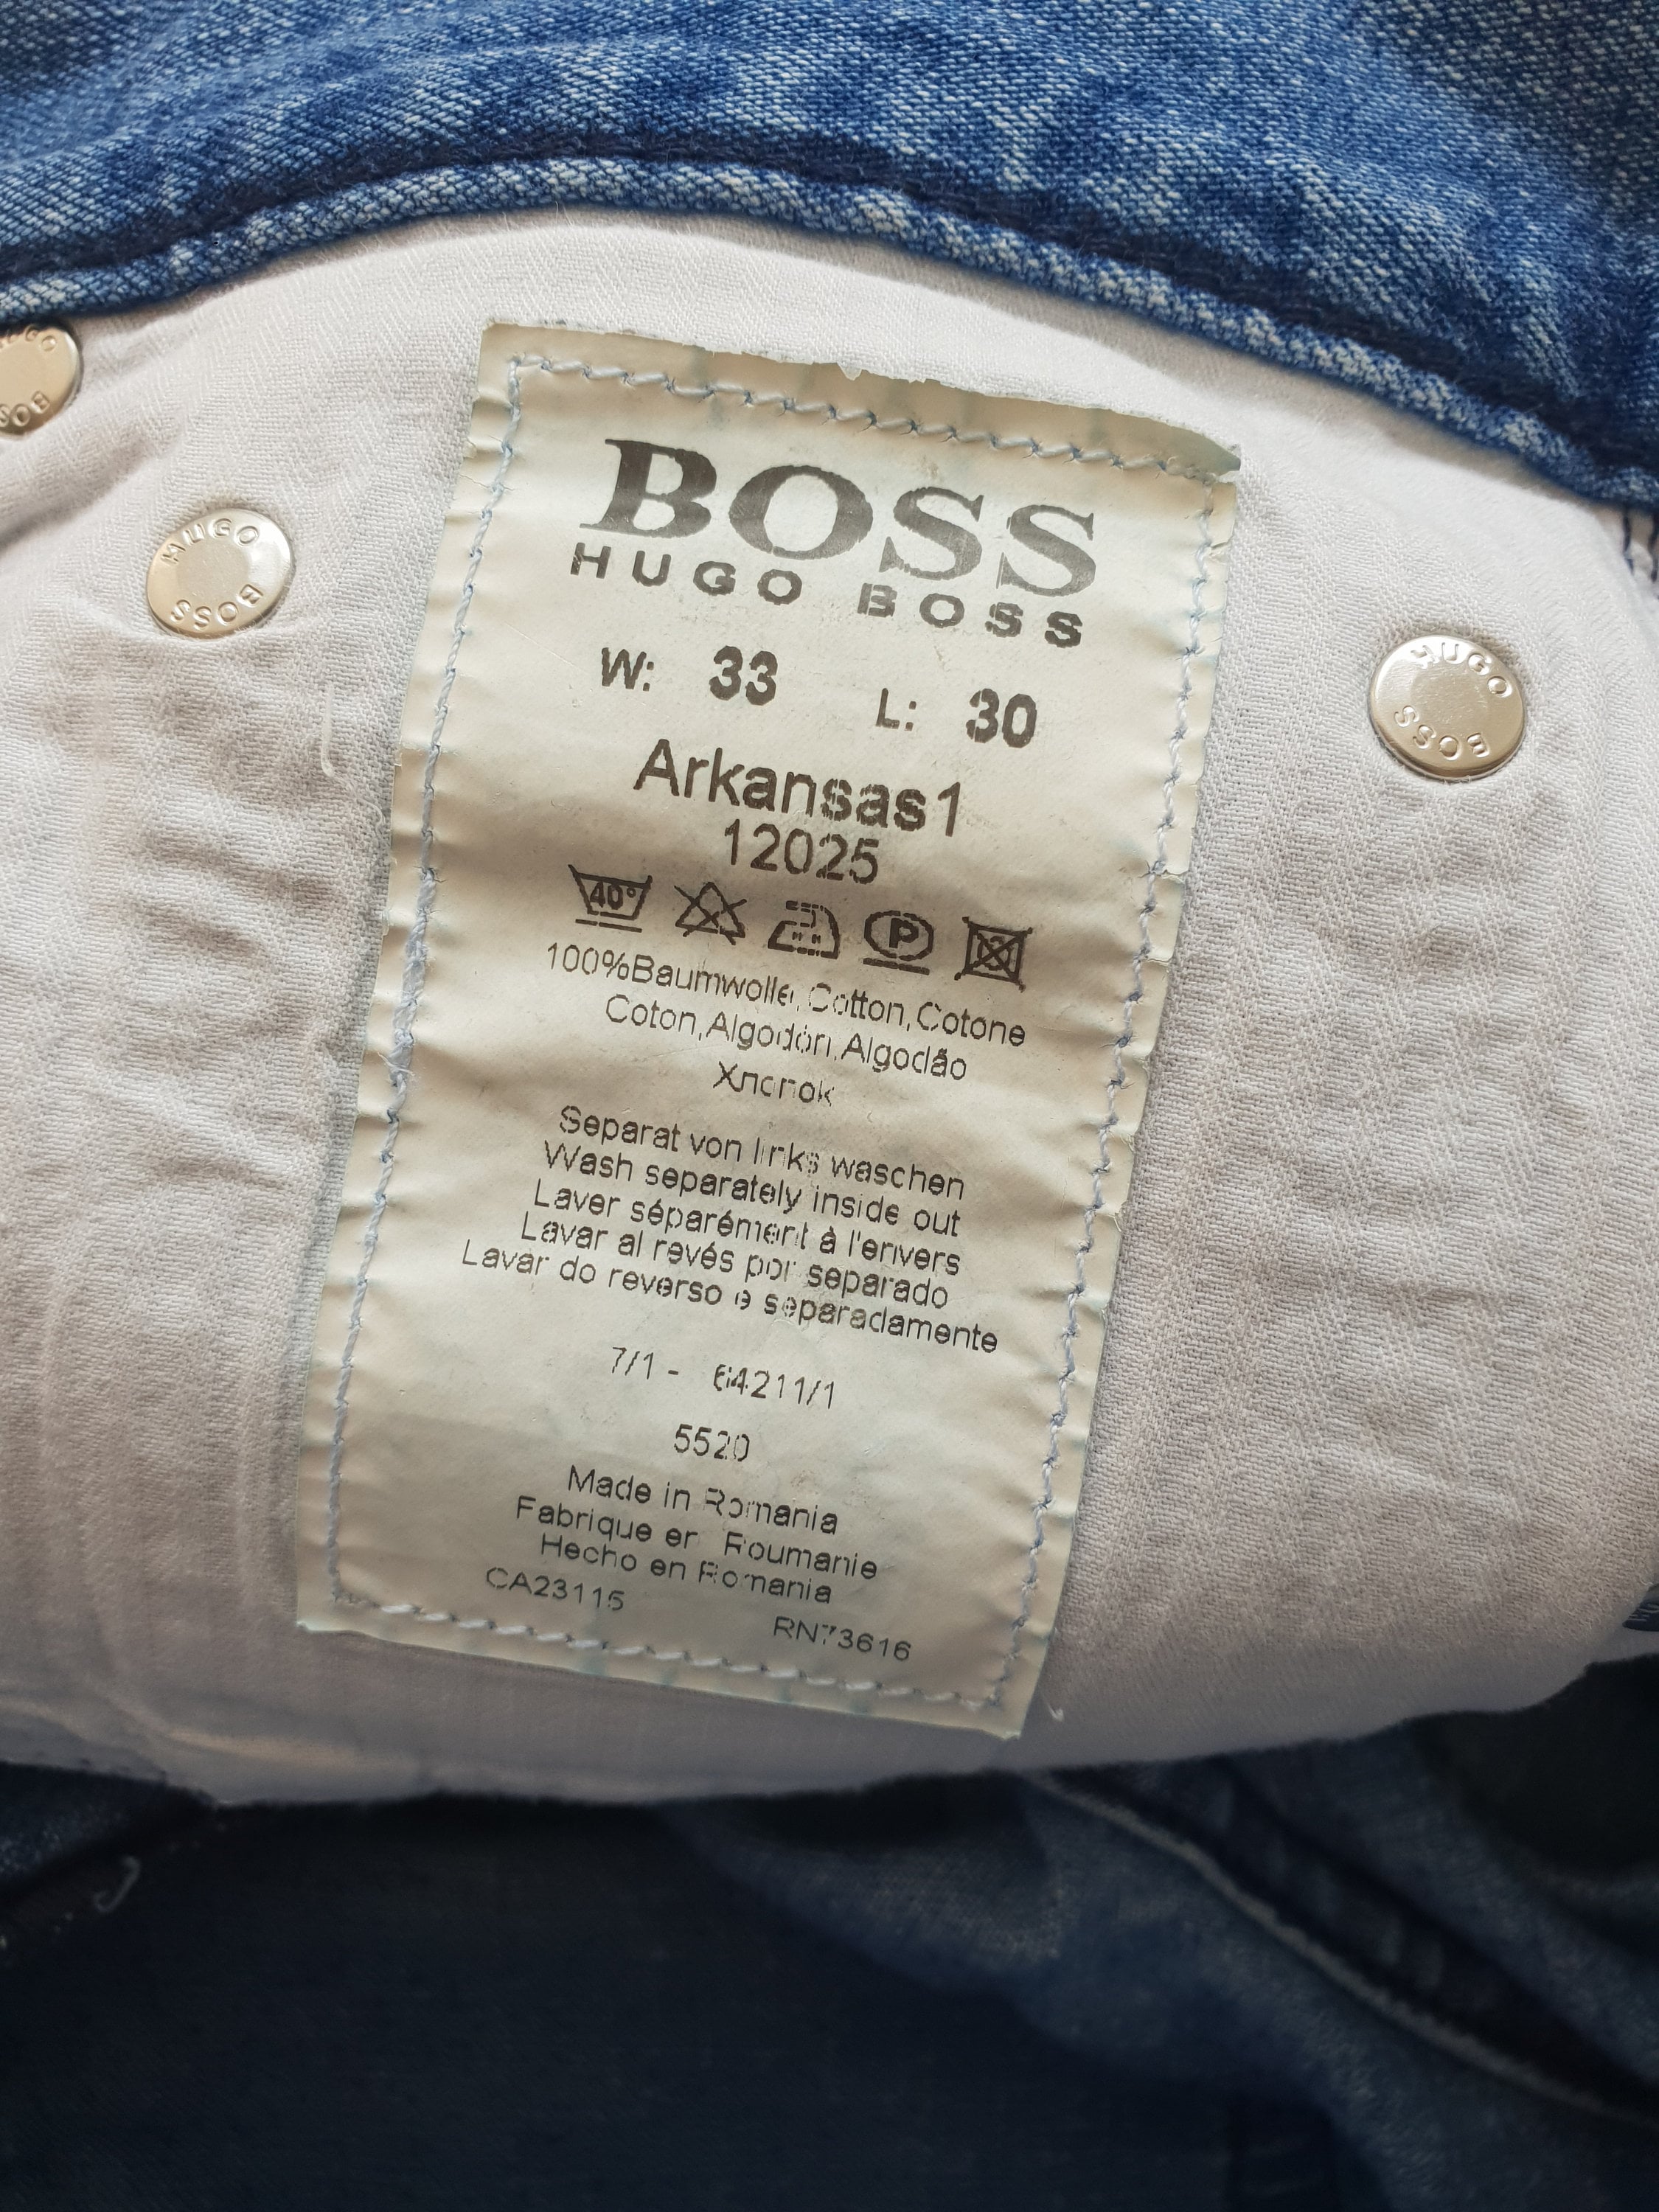 BOSS Distressed Jeans Vintage Hugo Boss Jeans Pants Size  Etsy Norway